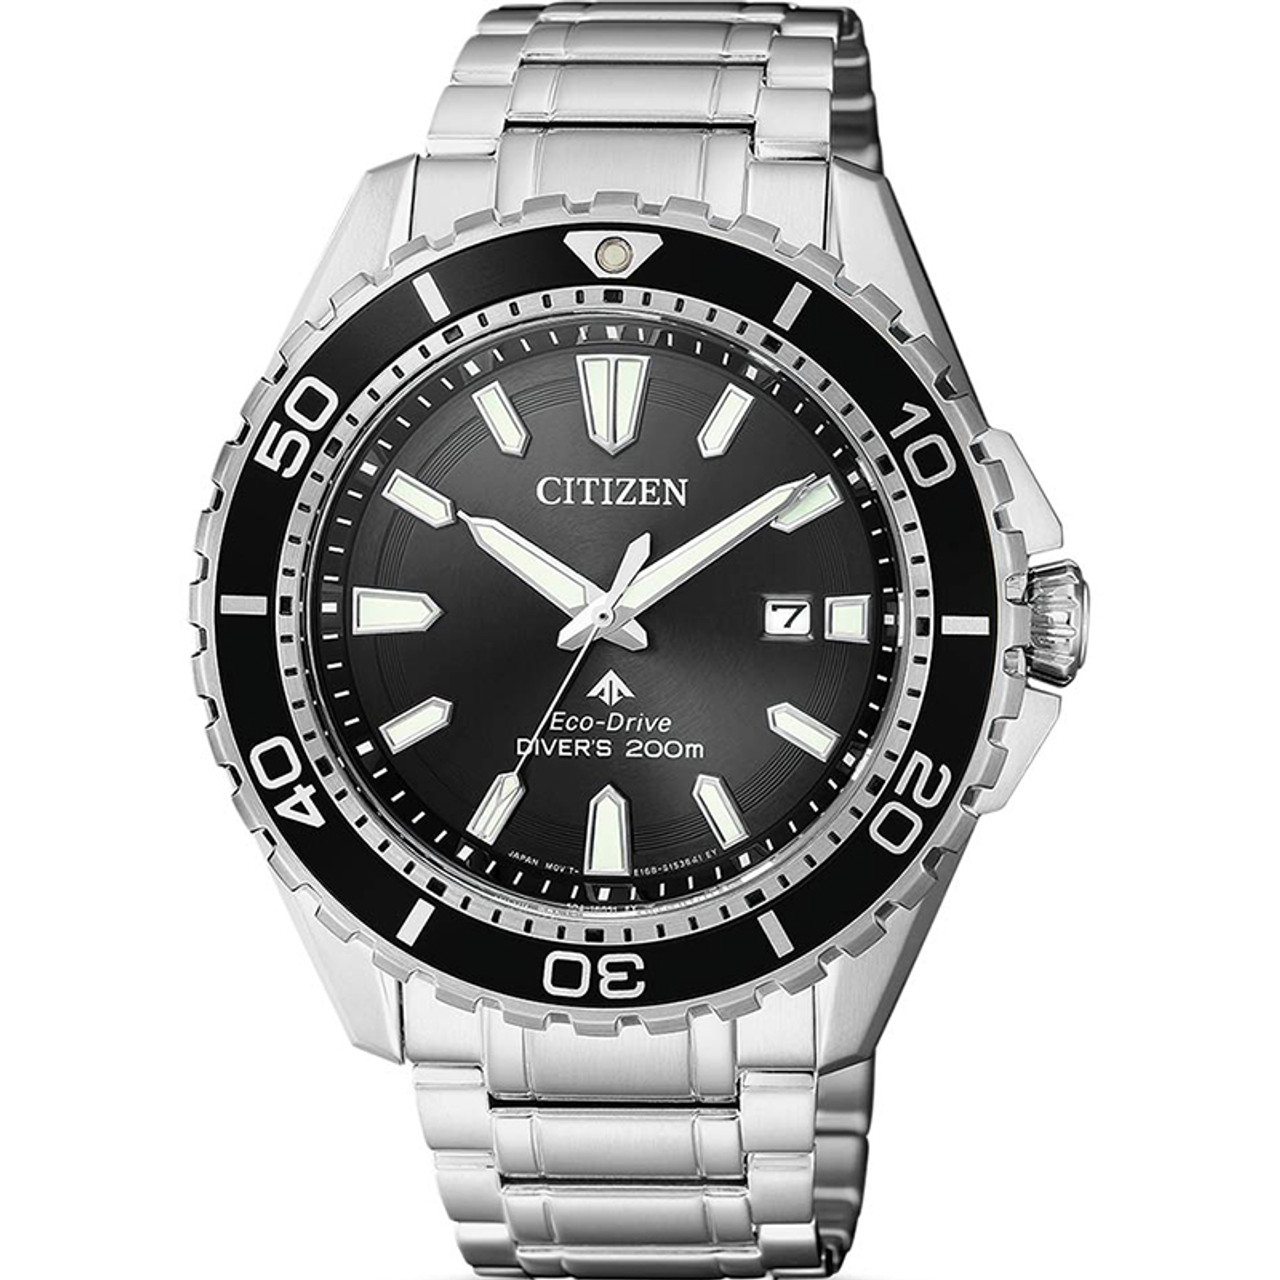 Citizen Eco-Drive Men's Promaster Diver's Stainless-Steel Watch BN0190-82E